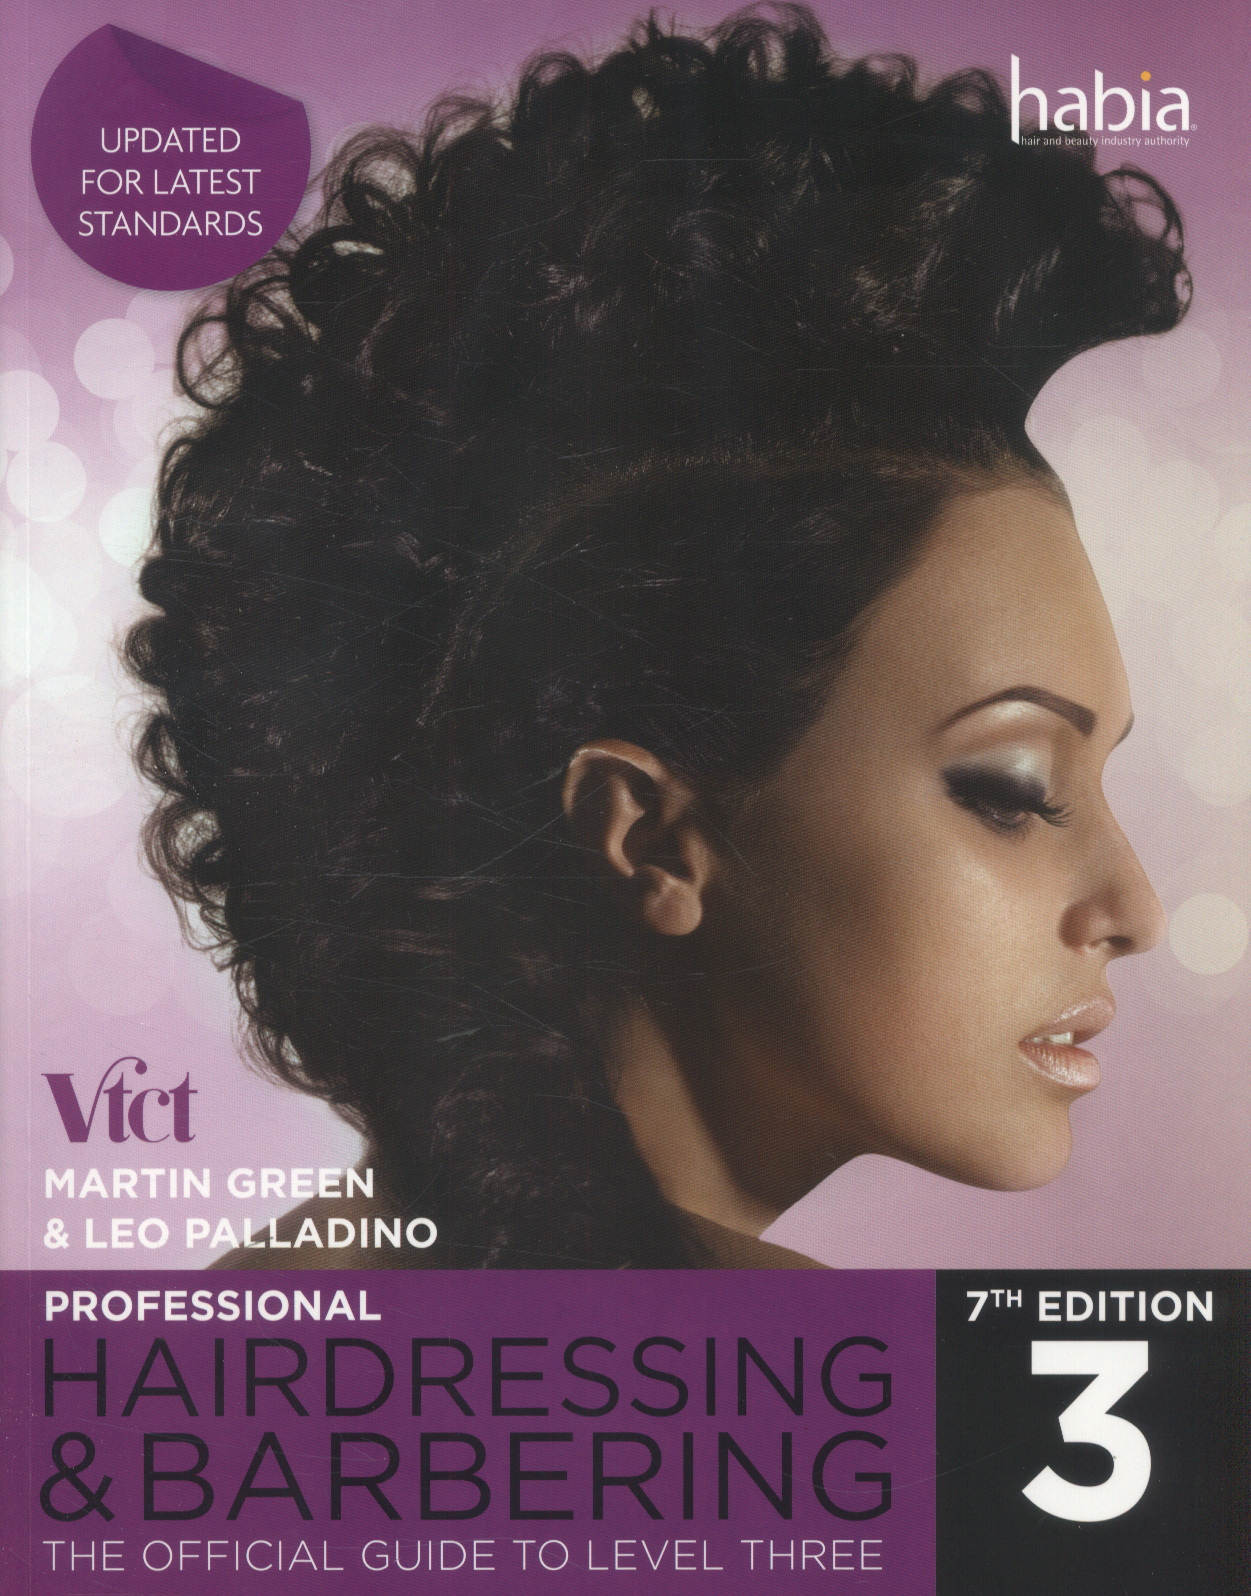 Professional Hairdressing & Barbering Level 3 7th edition by Leo Palladino & Martin Green